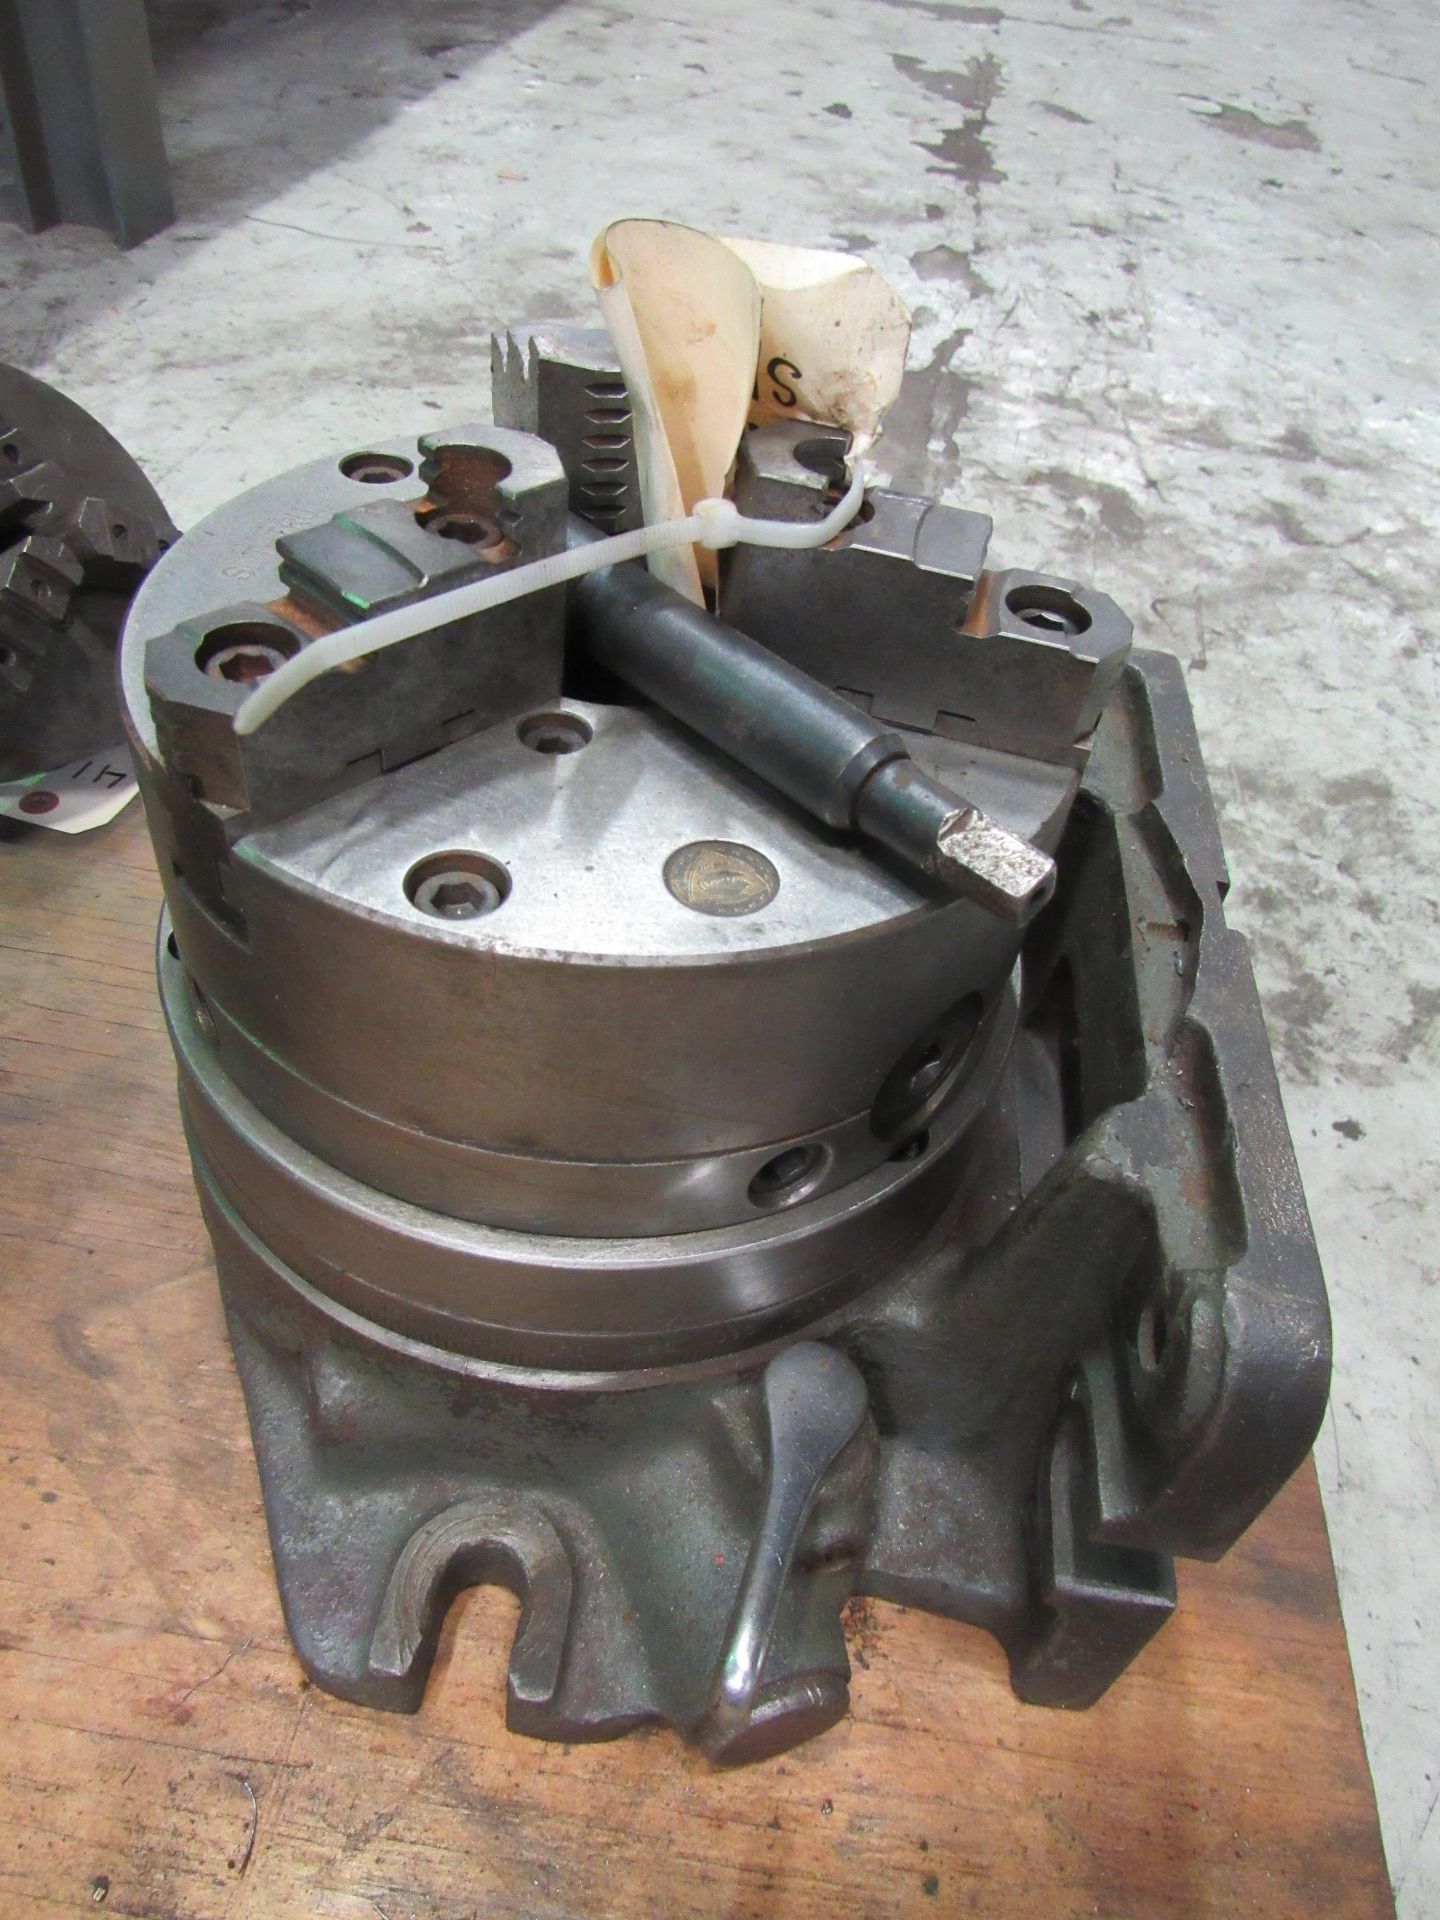 8" 3-Jaw Hartford Special Super Spacer Index Table, 8" dia. 3-jaw chuck, non-cumulative indexing - Image 5 of 5